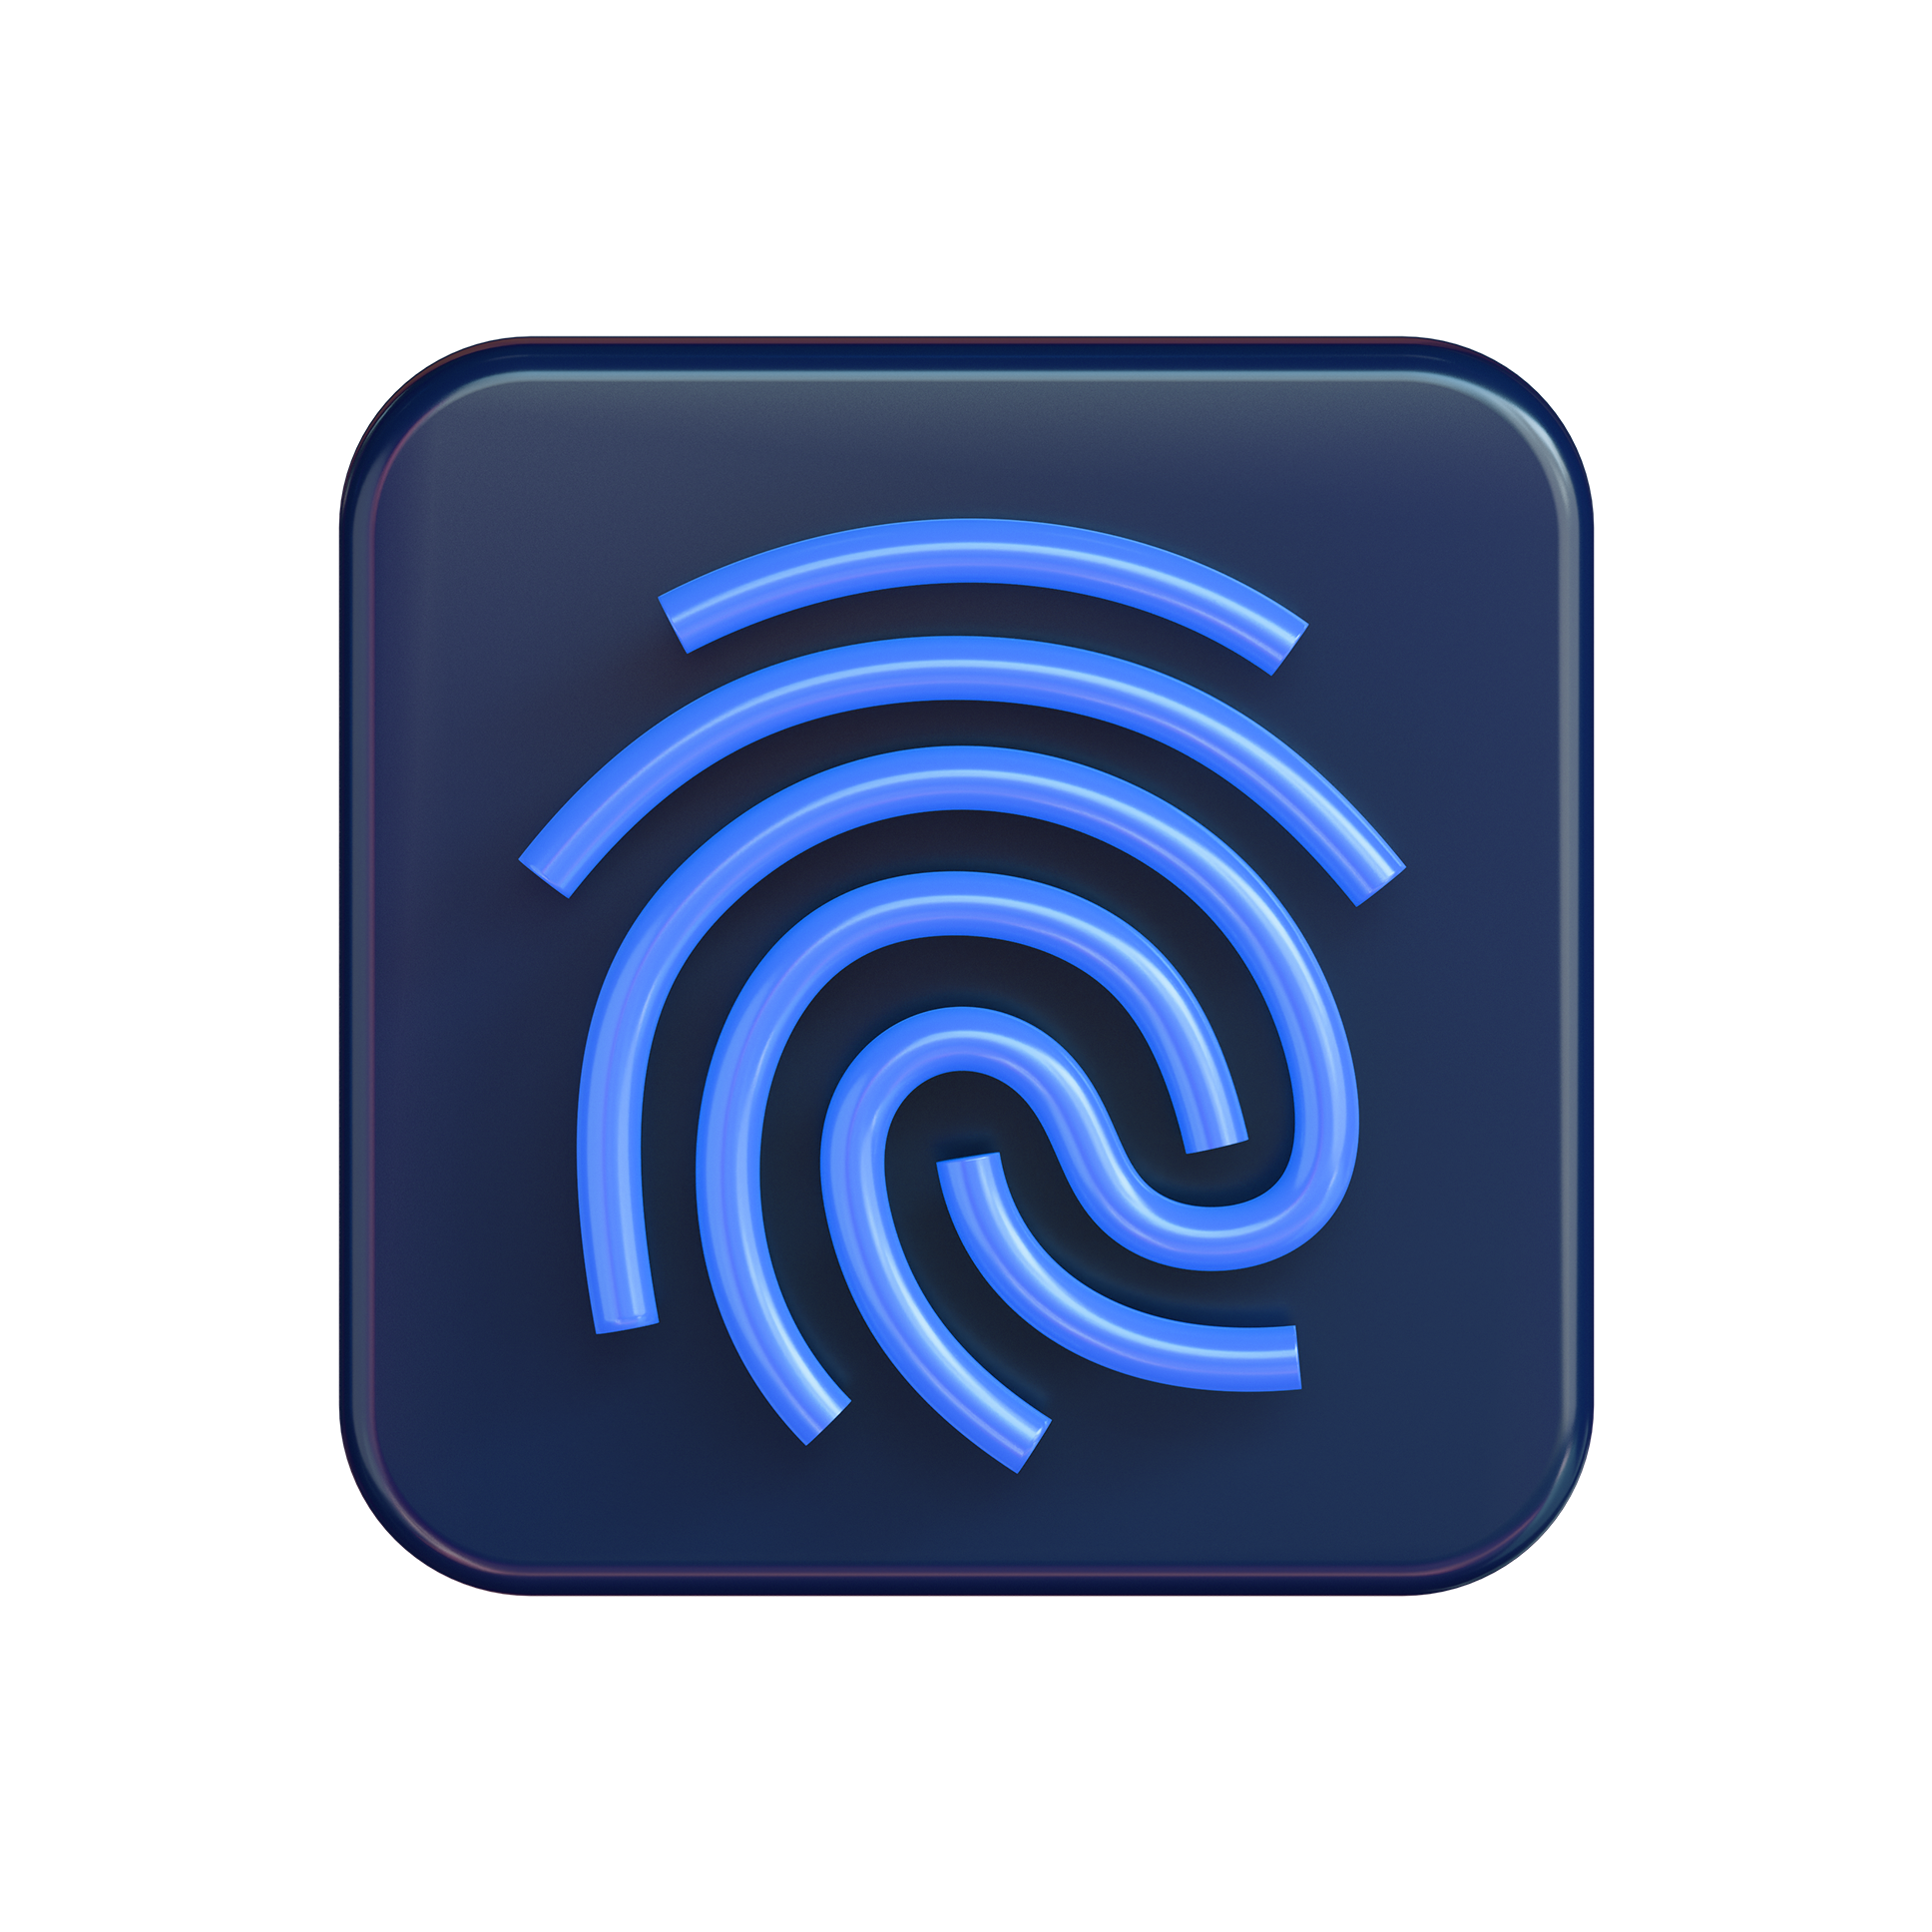 A square with a symbol of a fingerprint inside